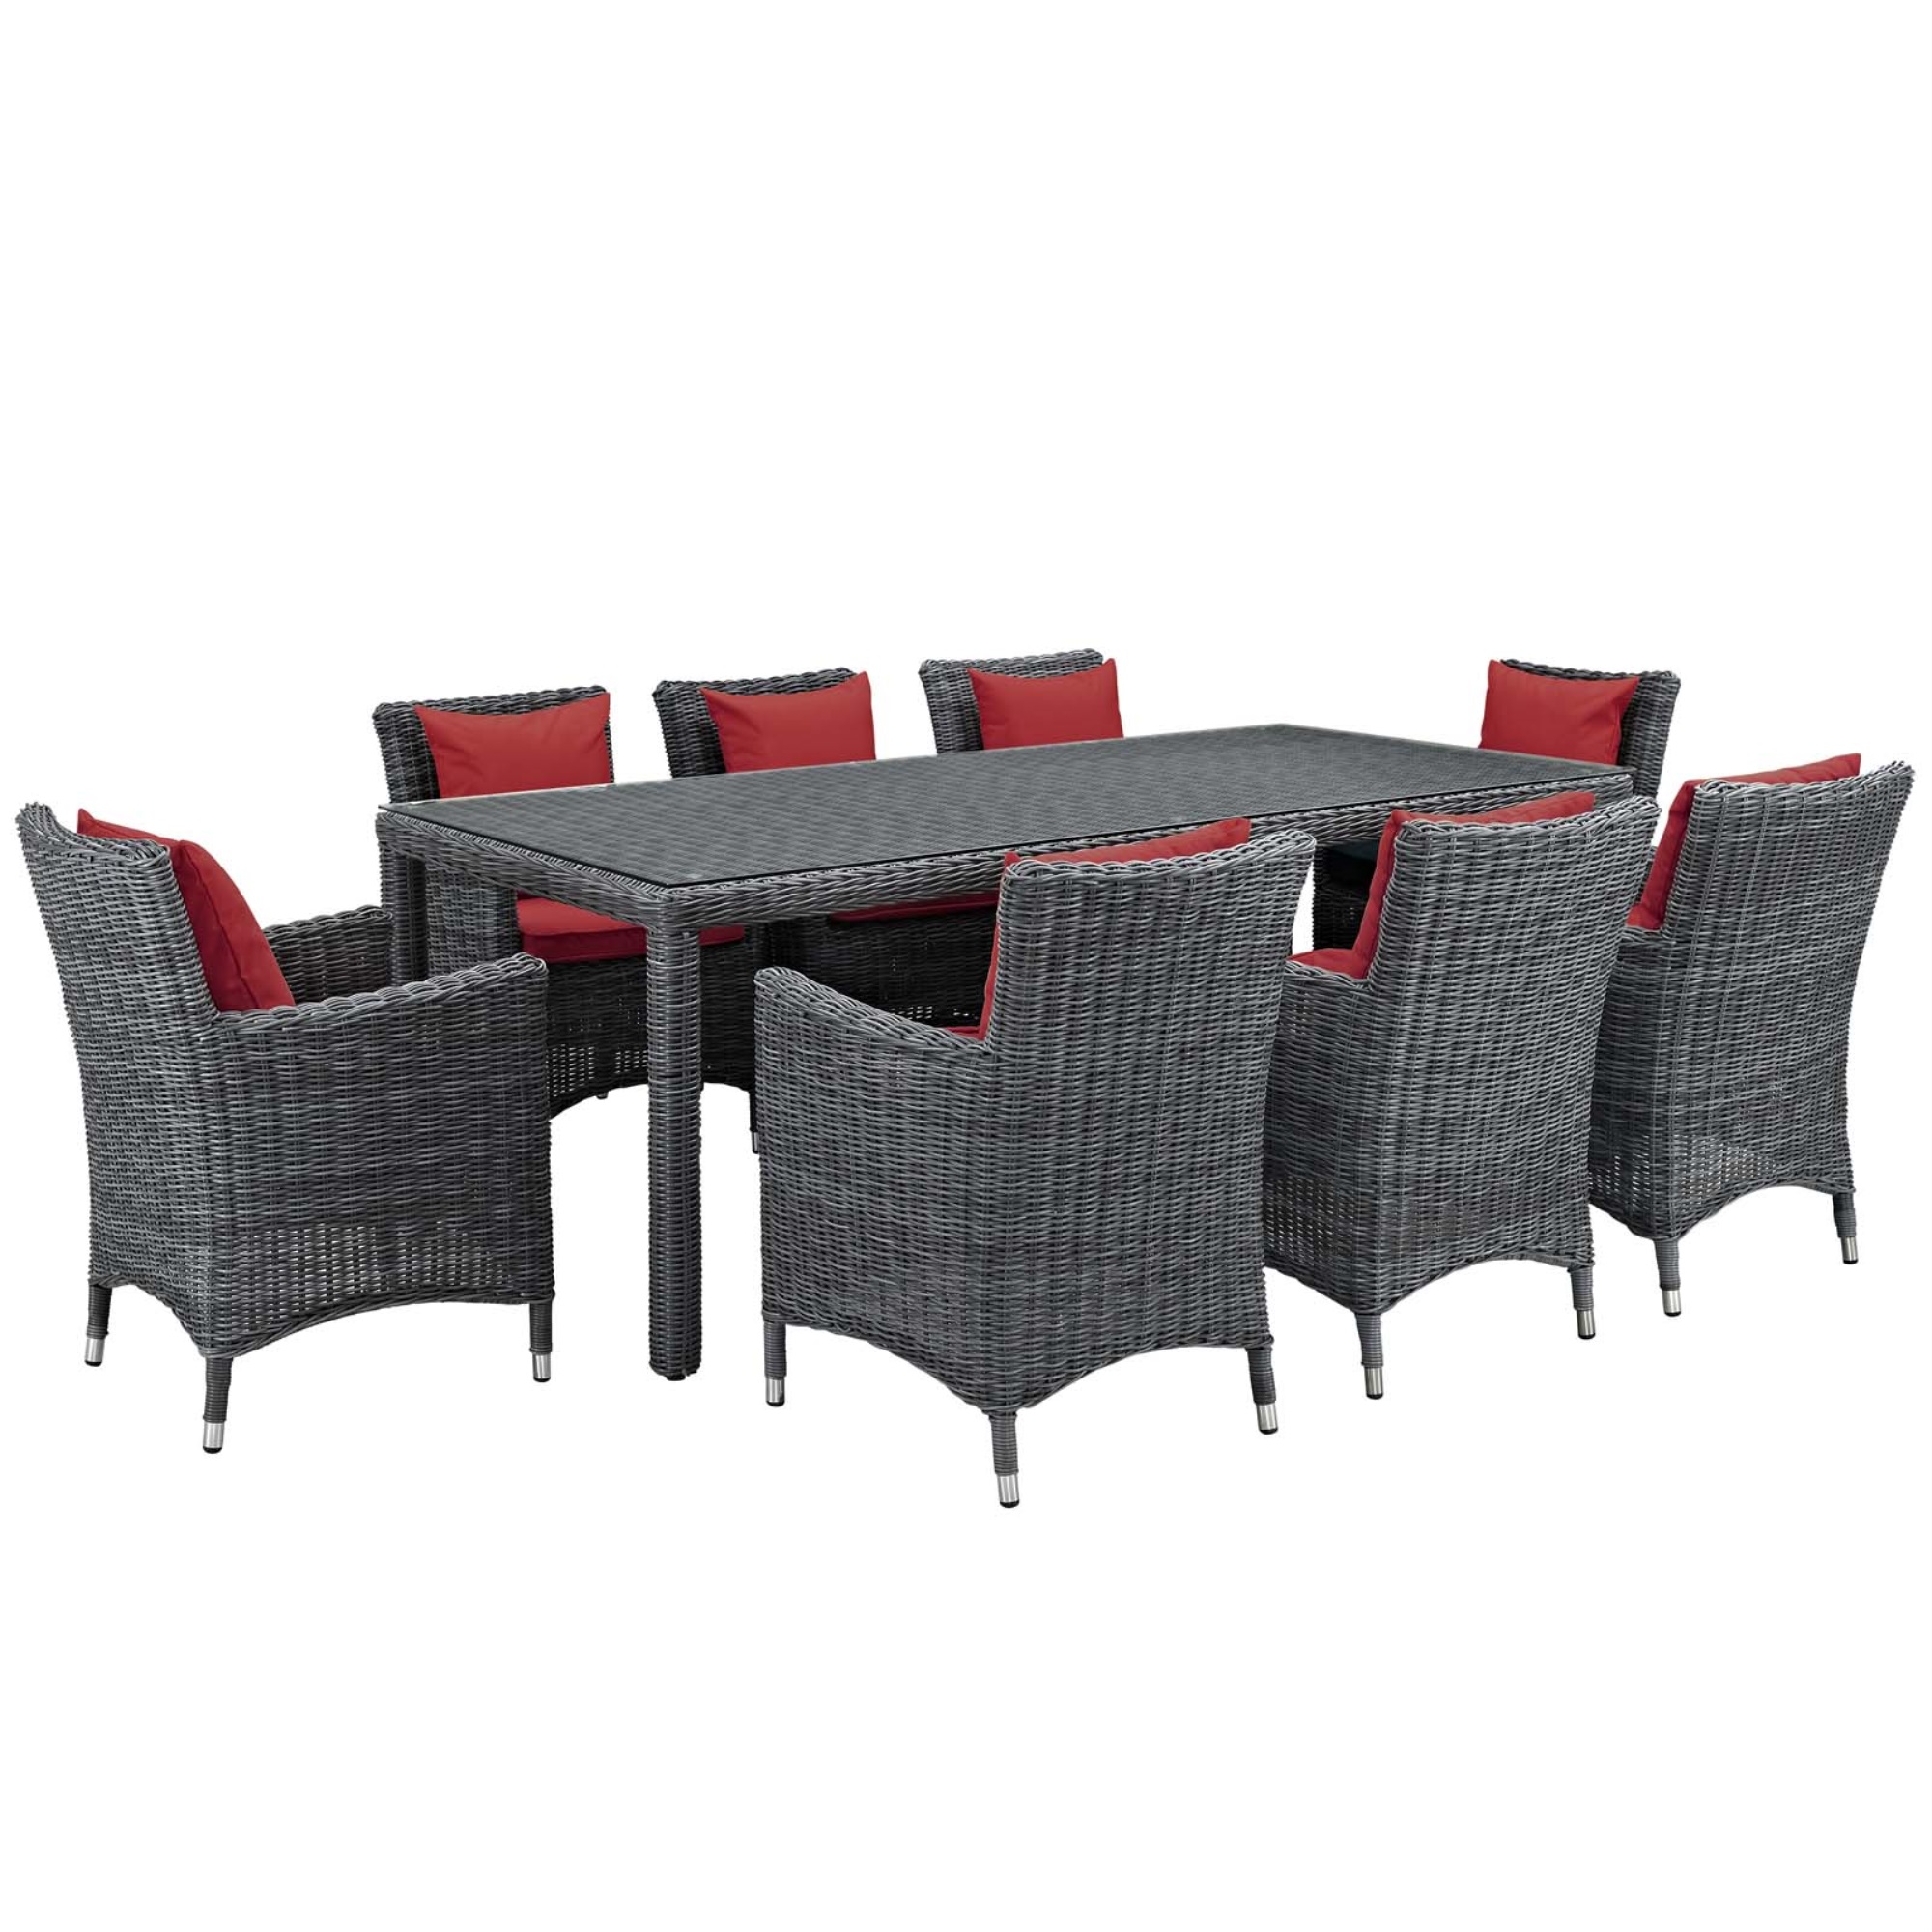 Ergode Ultimate Outdoor Comfort: Summon 9-Piece Patio Dining Set with Sunbrella Cushions & Two-Tone Rattan Weave